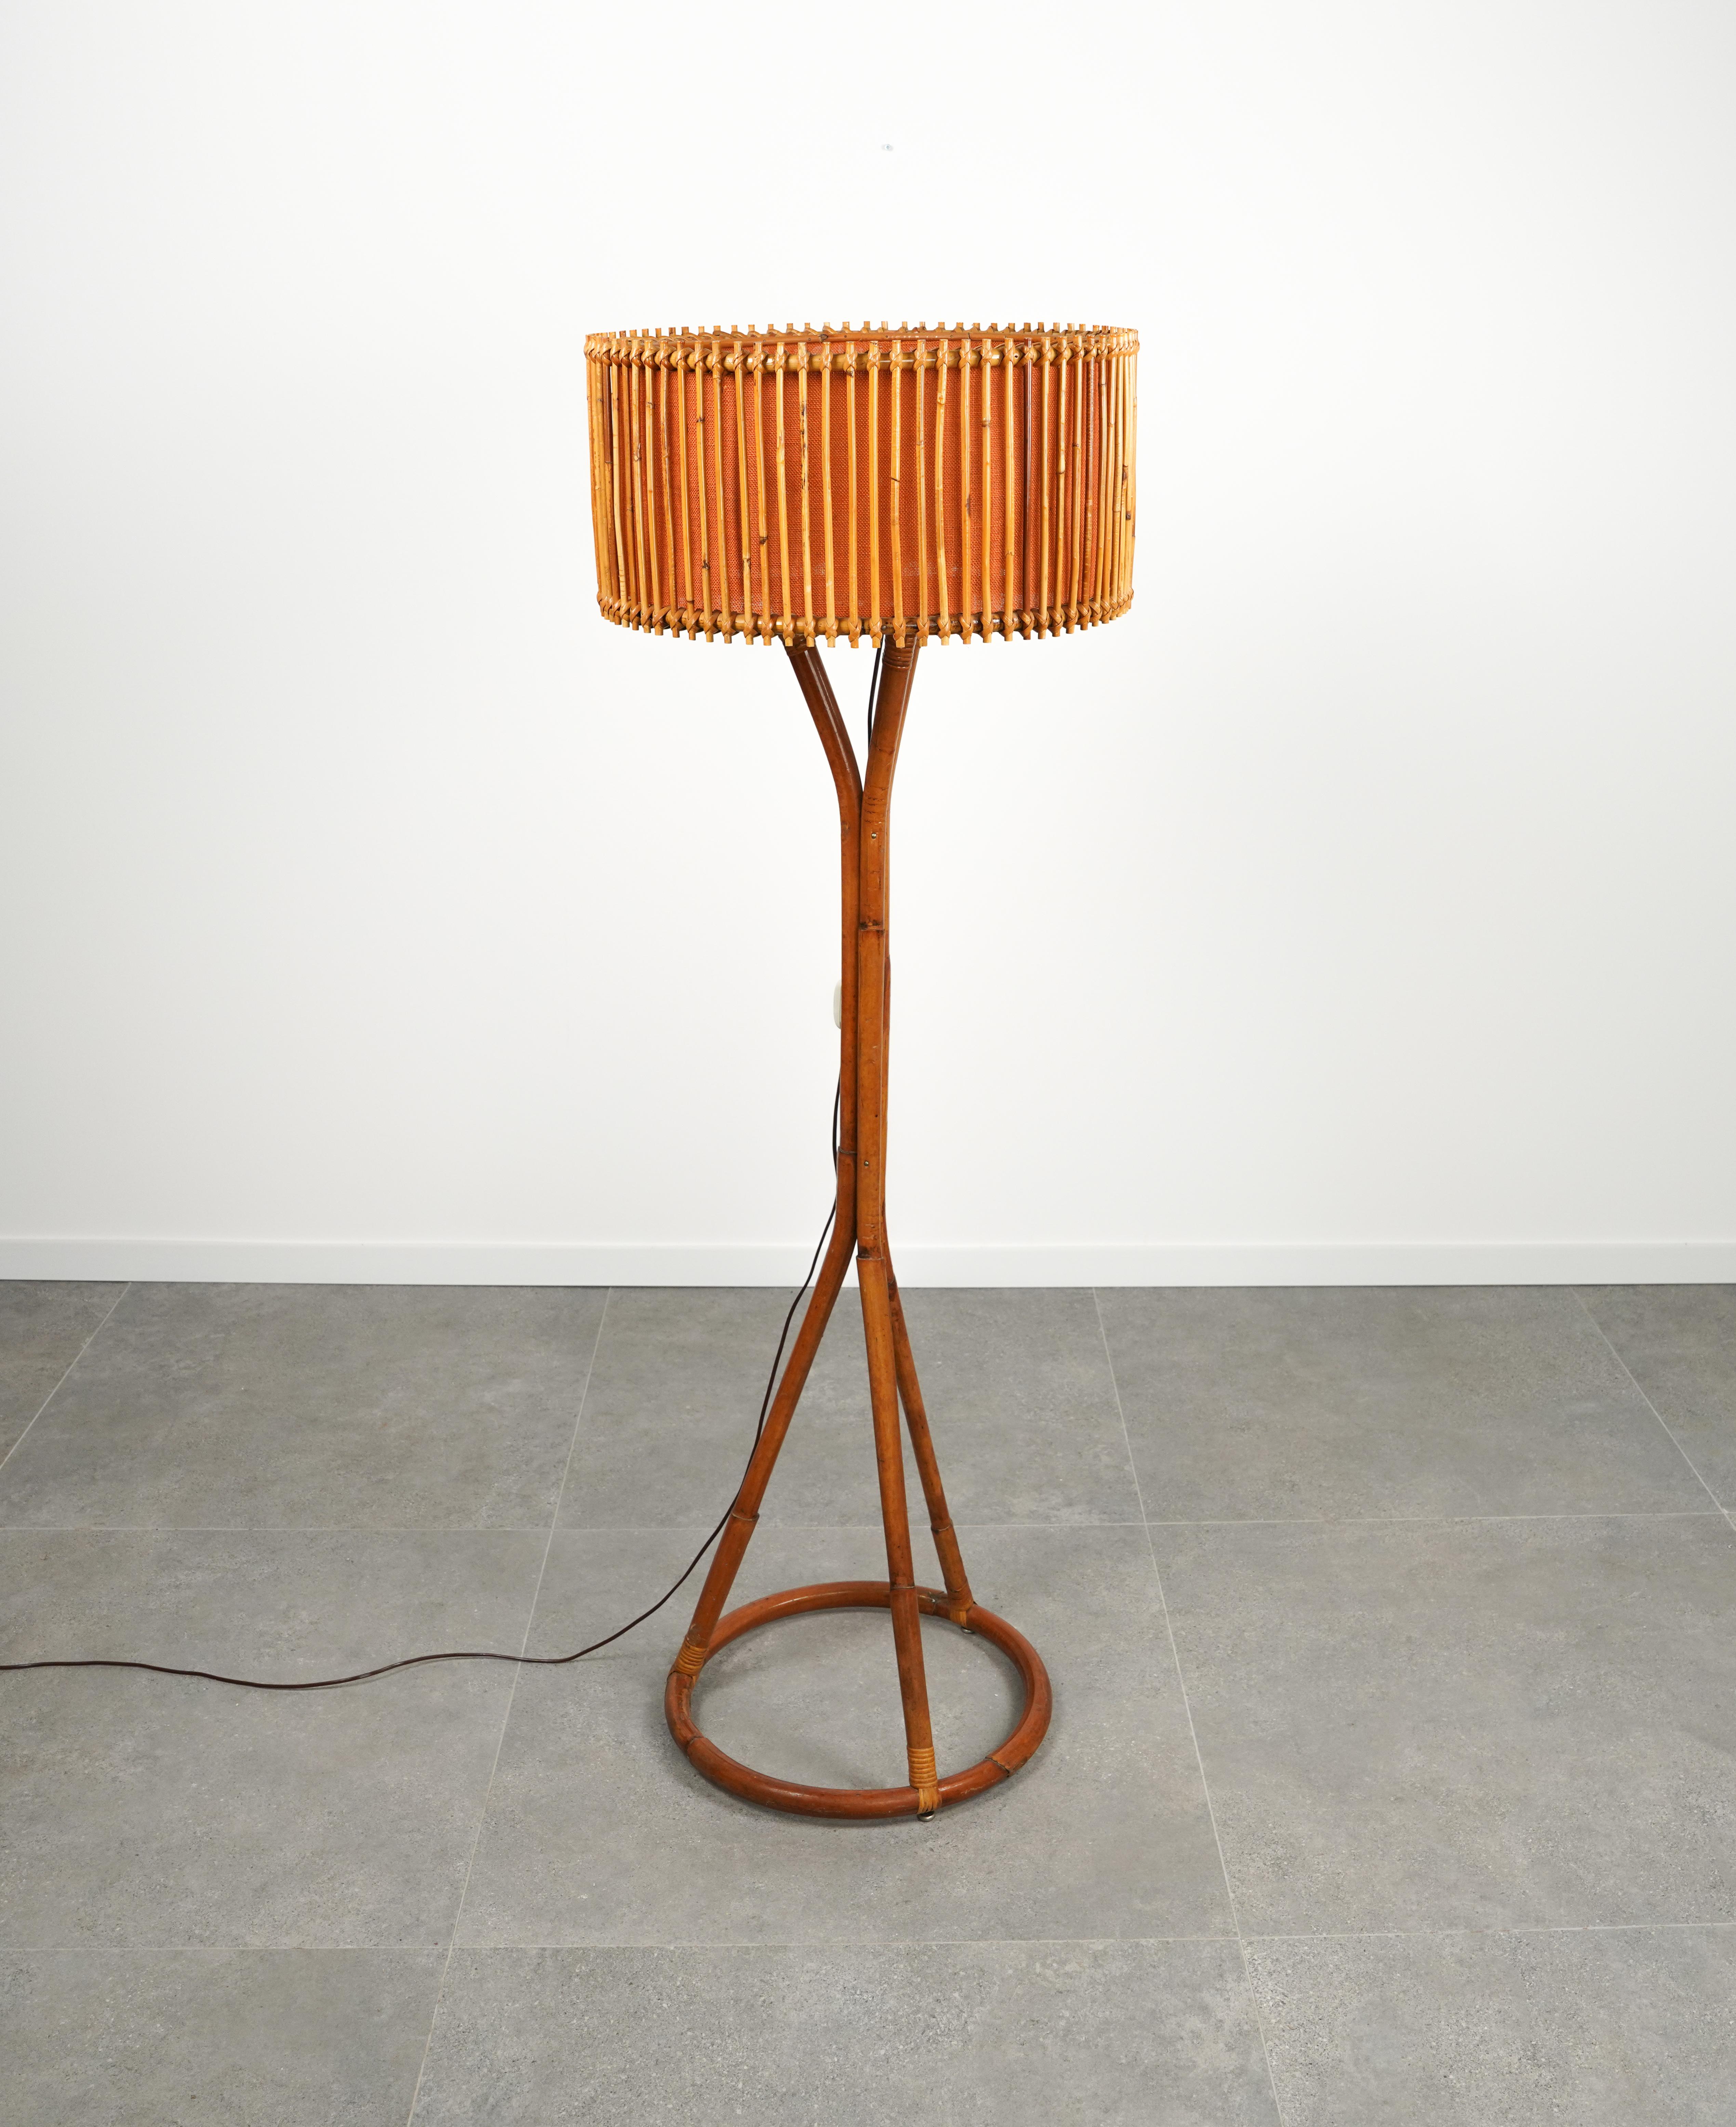 Midcentury amazing floor lamp in bamboo and rattan in the style of Franco Albini.

Made in Italy in the 1960s.